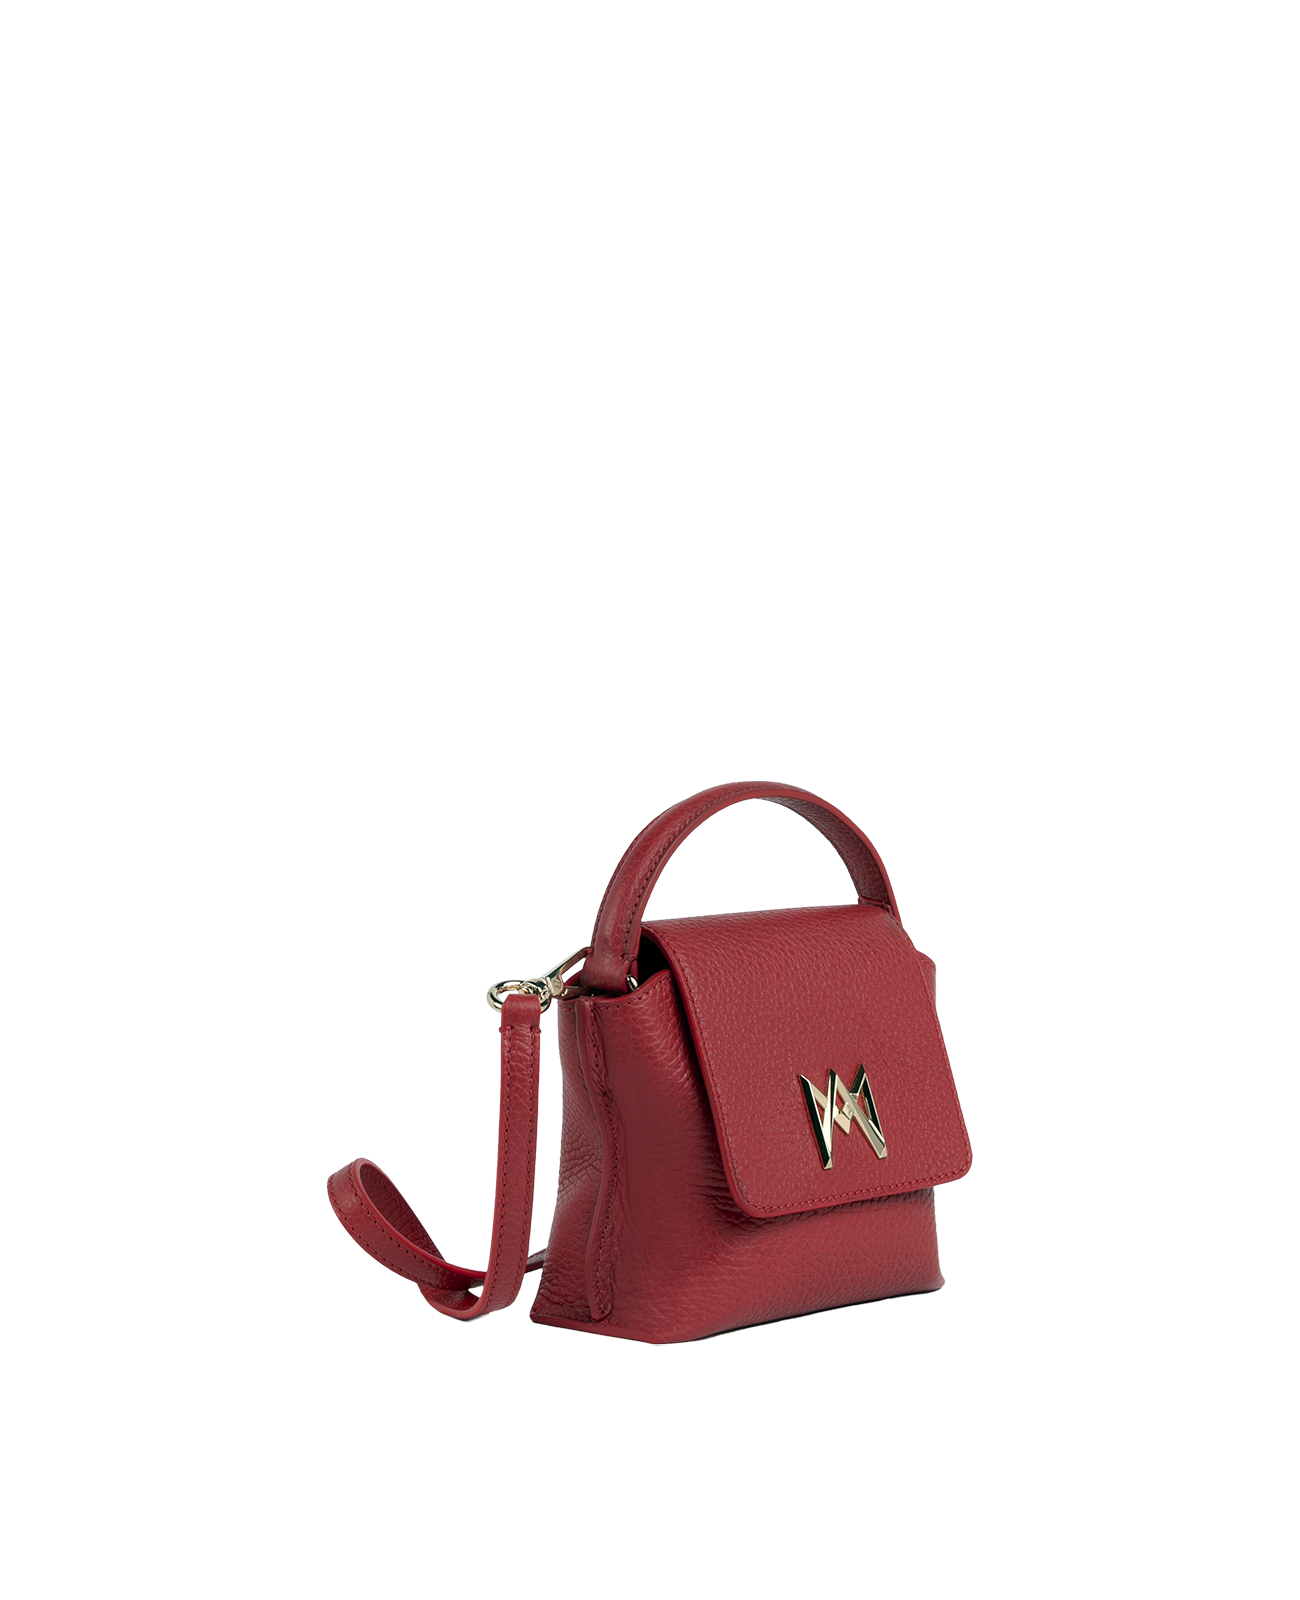 Cross-body bag in Italian full-grain leather, semi-aniline calf Italian leather with detachable shoulder strap.Three compartments, zip pocket in the back compartment. Magnetic flap closure with logo. Color: Dark Red. Size:Mini